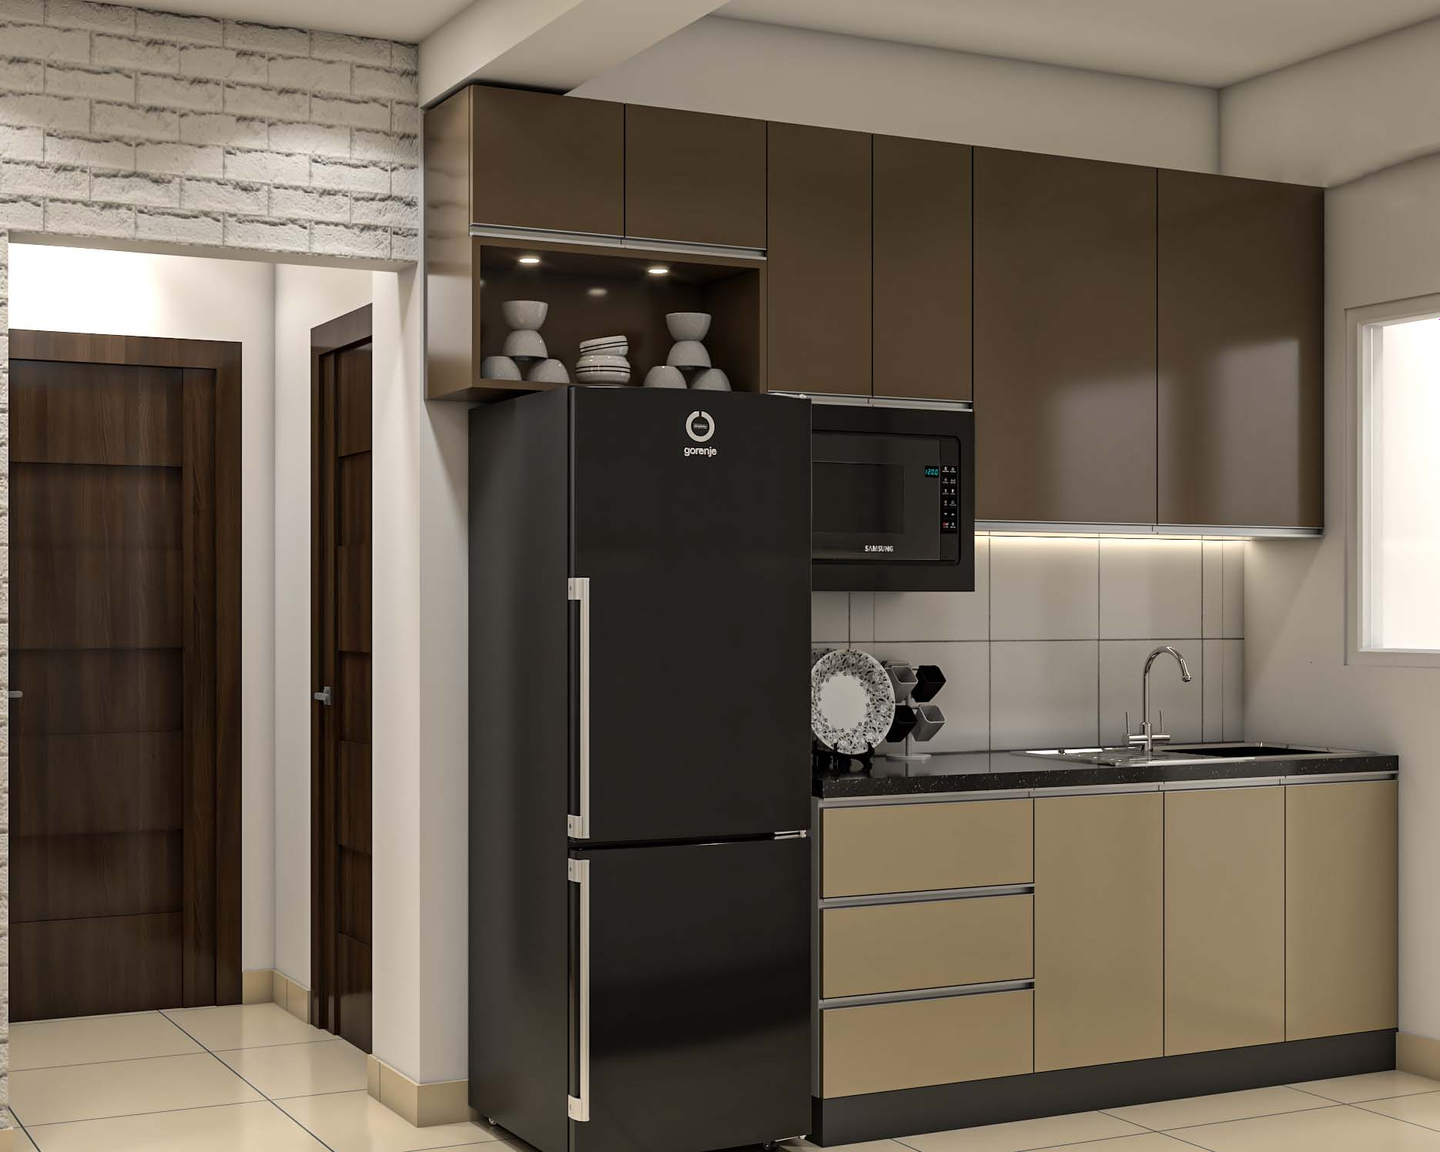 Contemporary Parallel Kitchen Design With A Crockery Unit